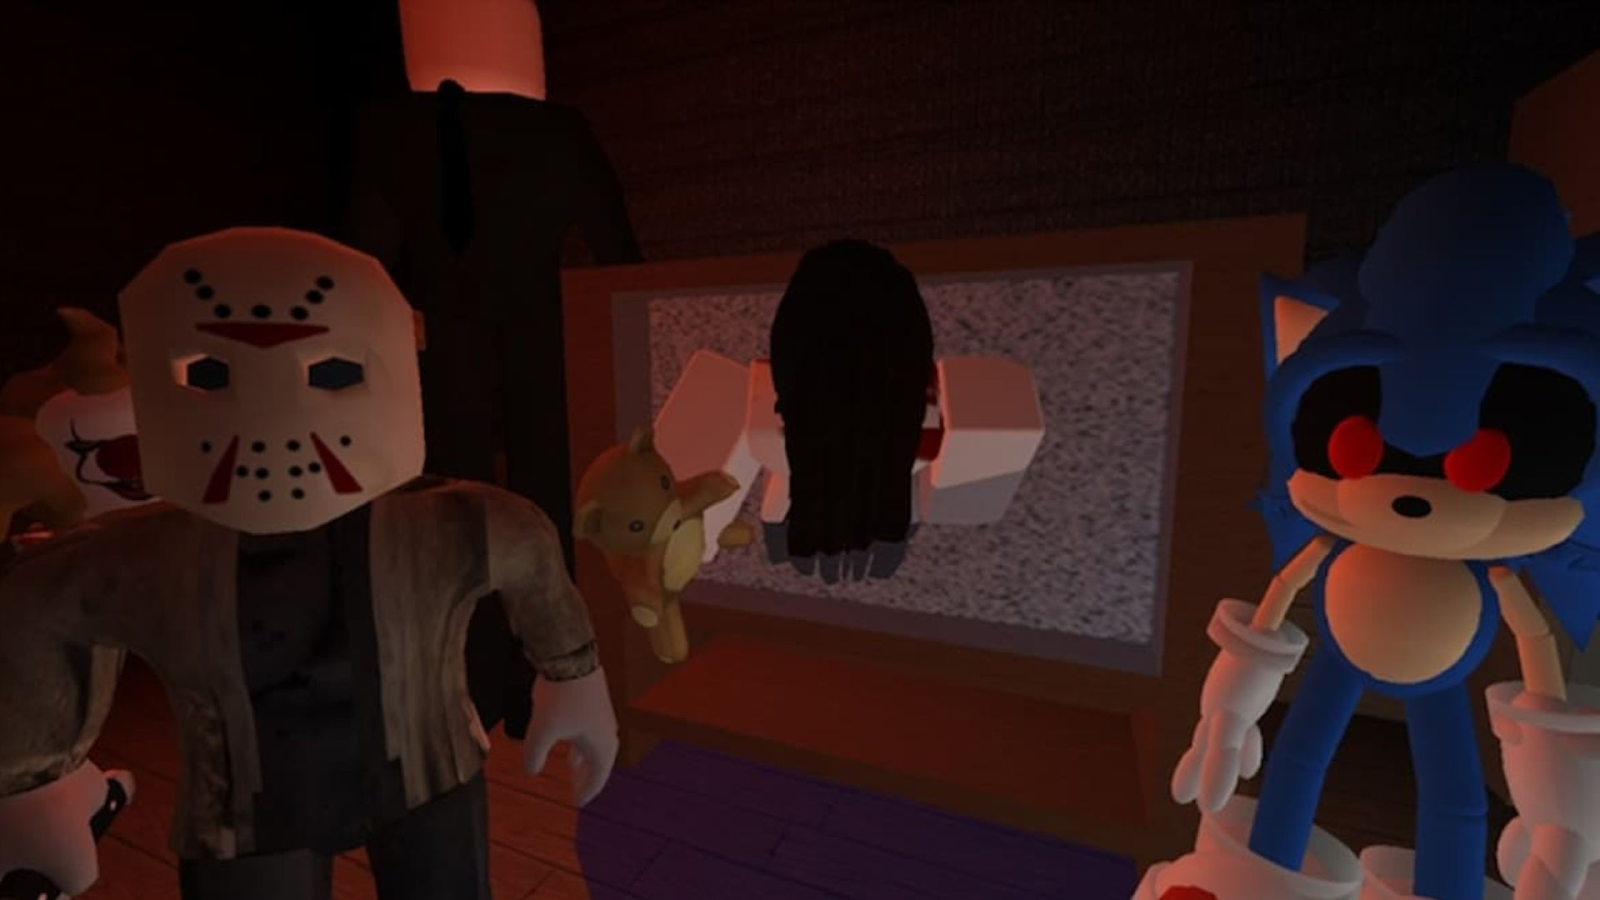 Scary Roblox Games to Play With Friends